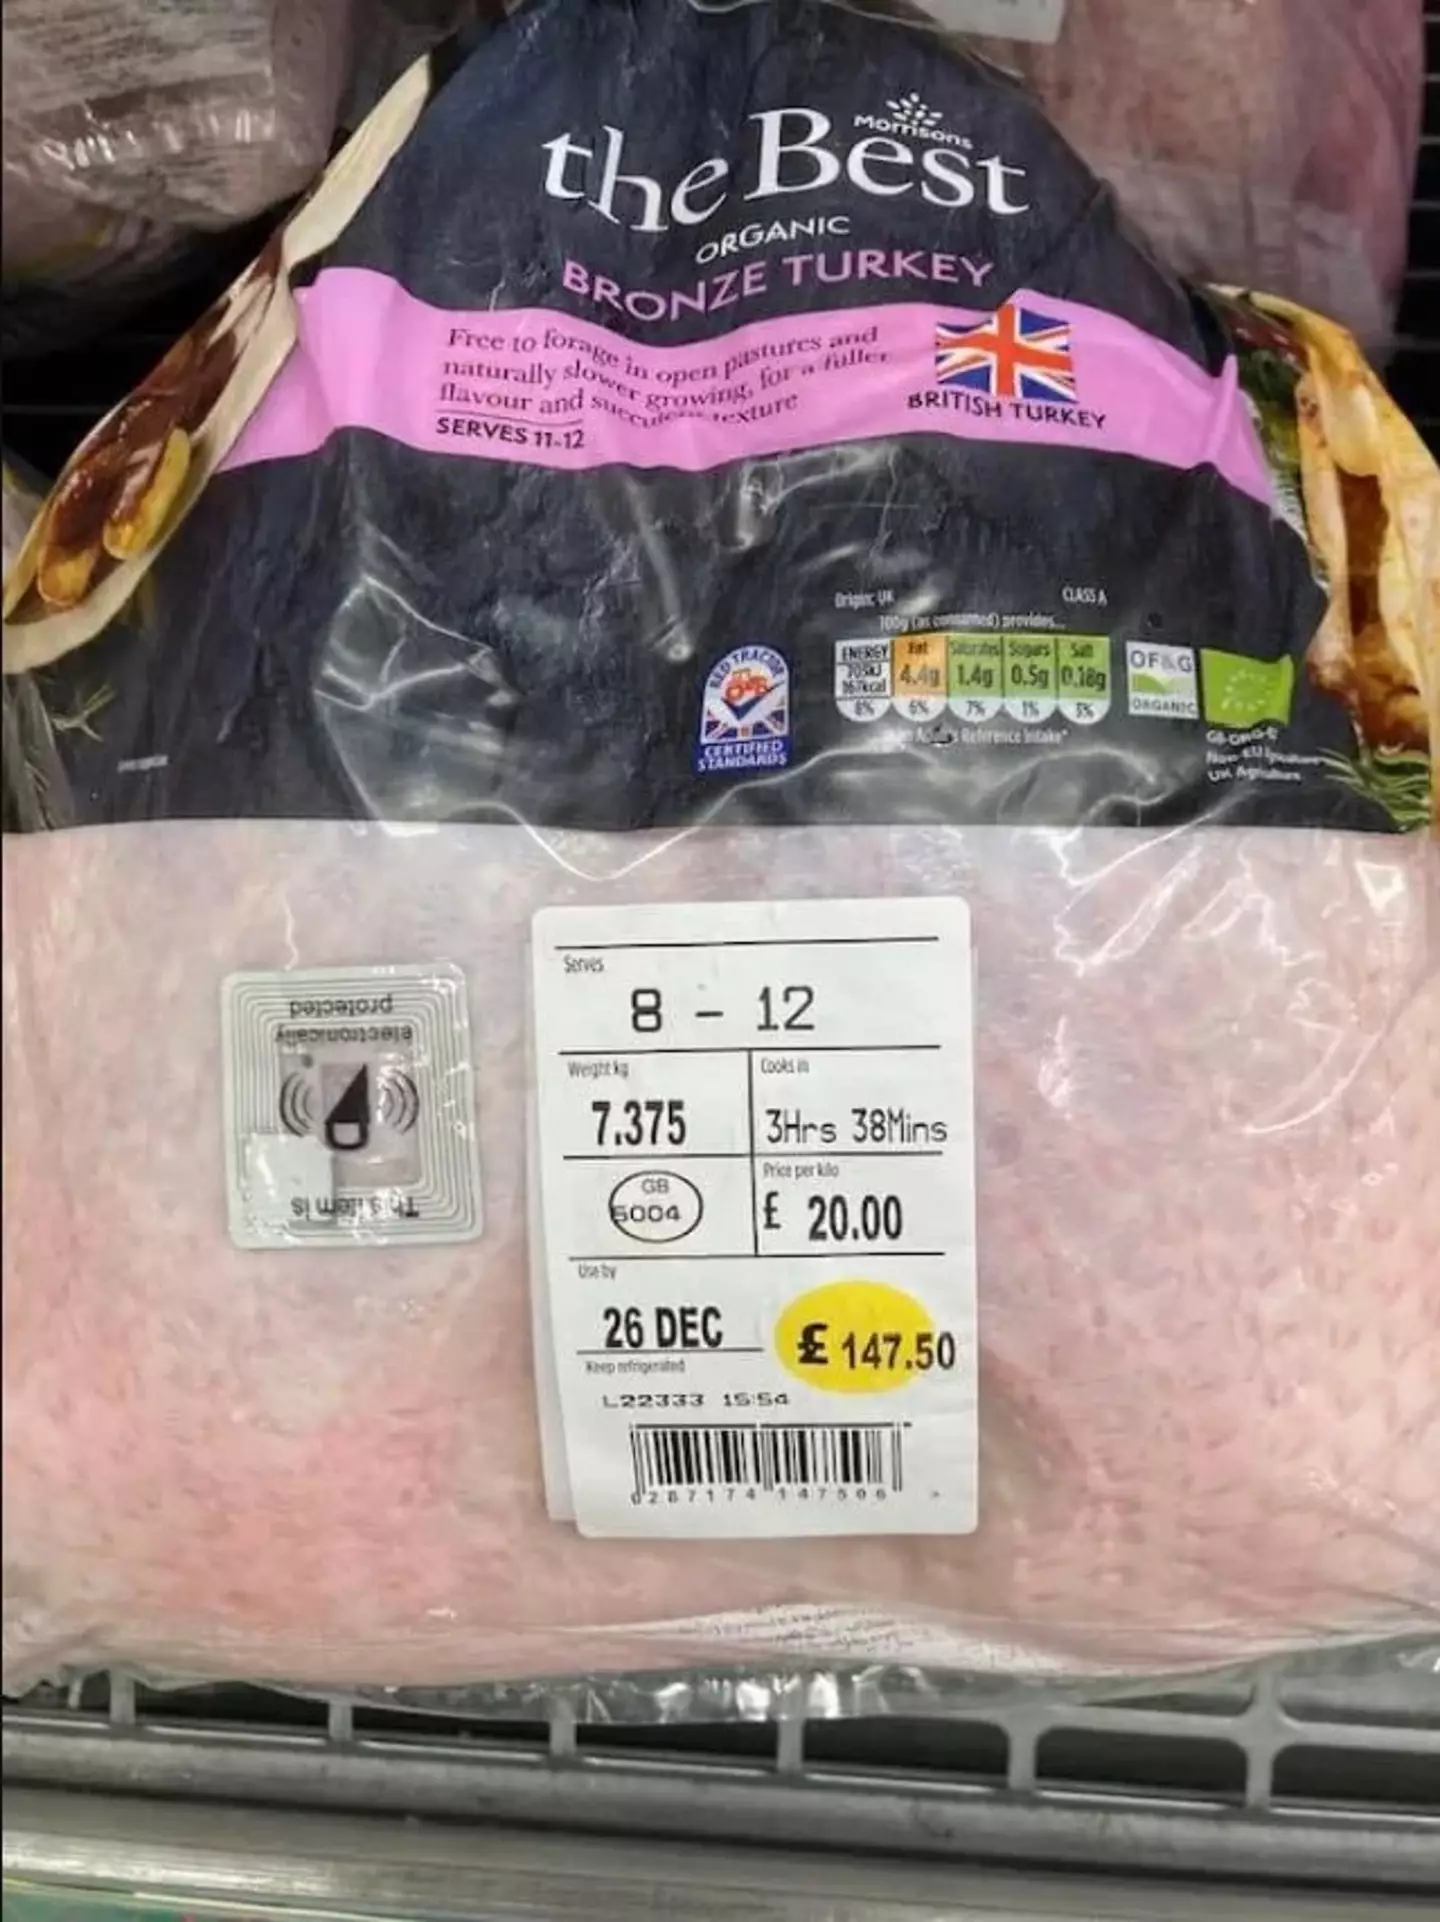 The turkey was spotted costing £147.50.